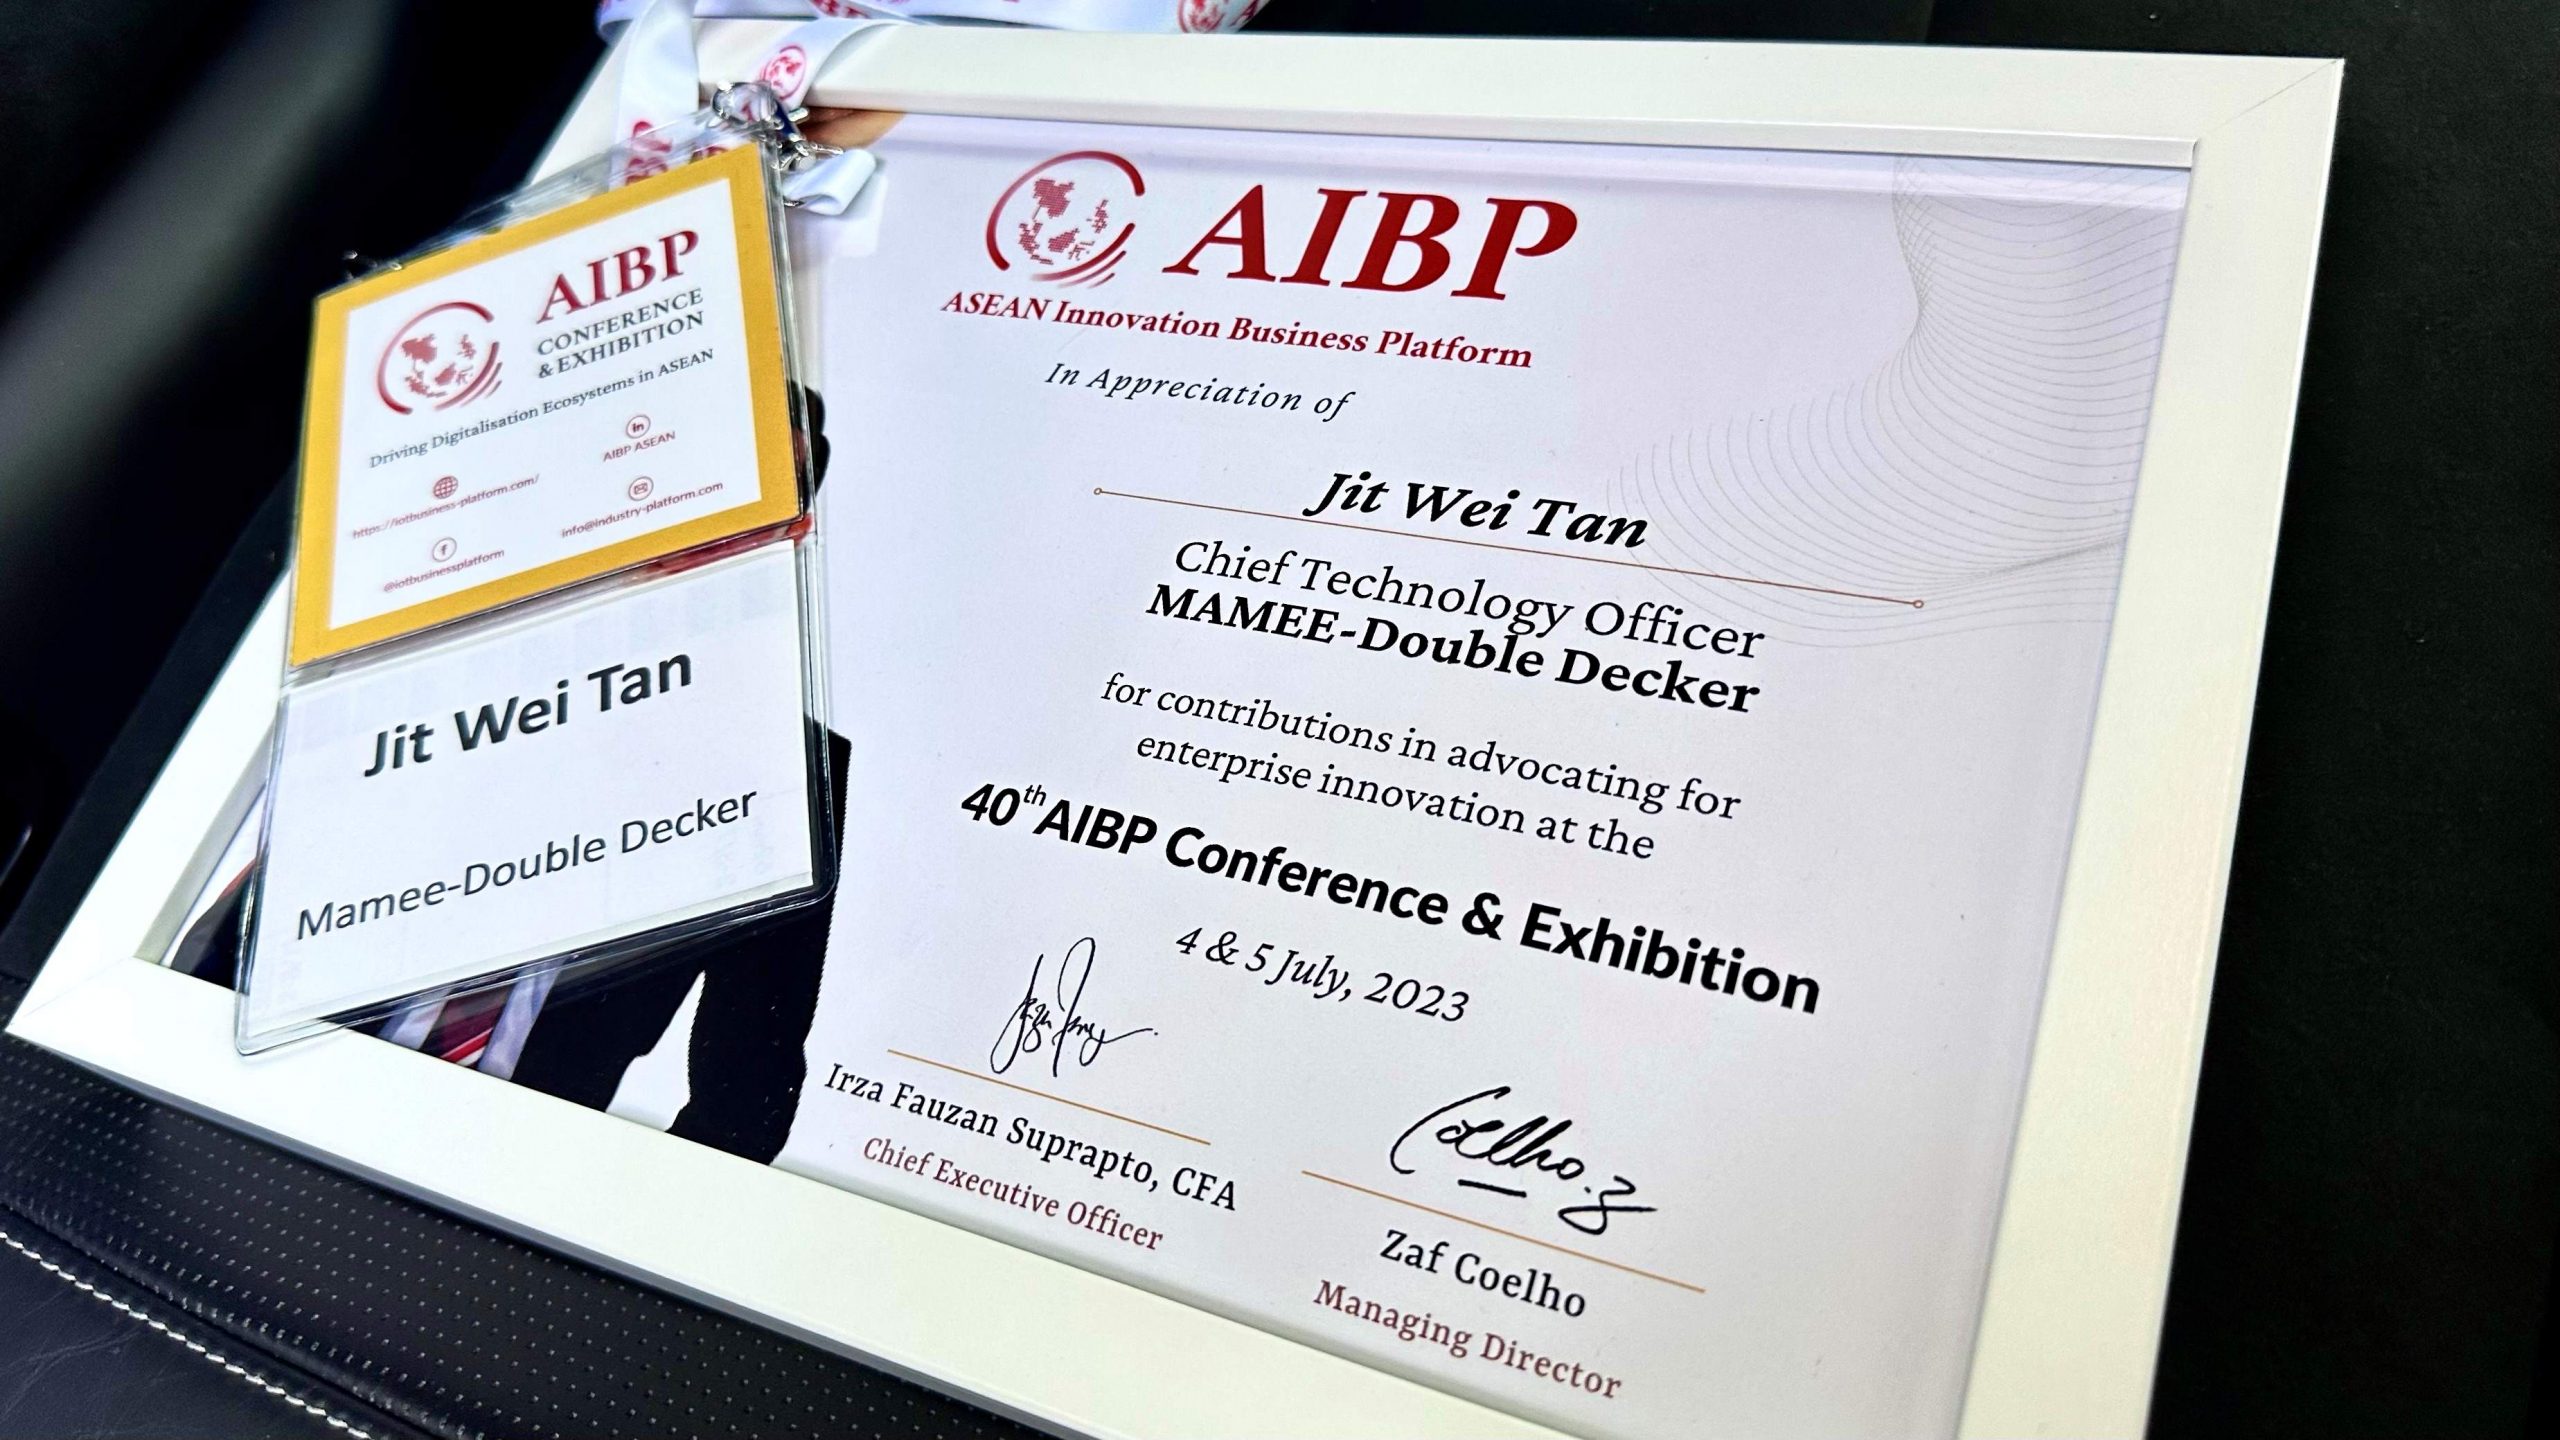 Chief Technology Officer, a Key Feature at the 40th ASEAN Innovation Business Platform (AIBP) Conference & Exhibition Malaysia, KL!